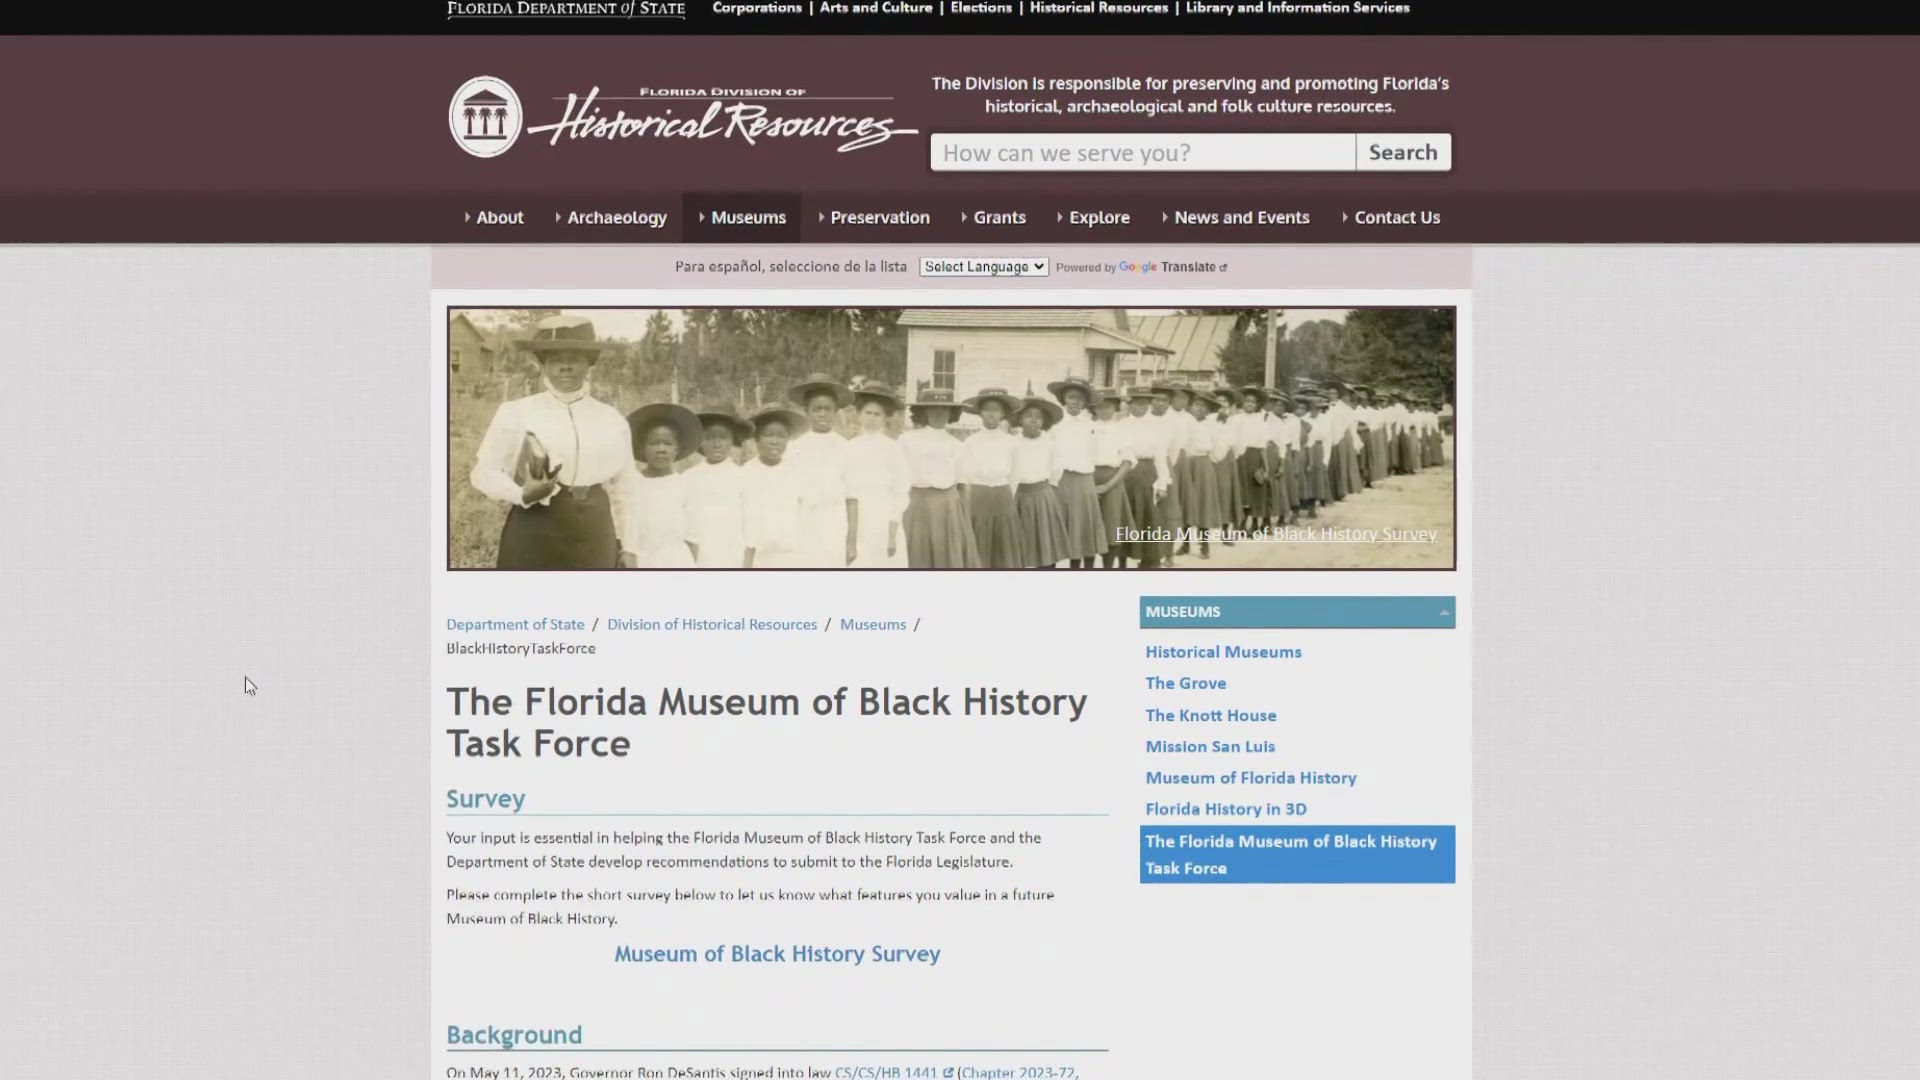 On Friday, the Florida Museum of Black History Task Force will meet to recommend the site. One location in consideration is in St. Johns County.